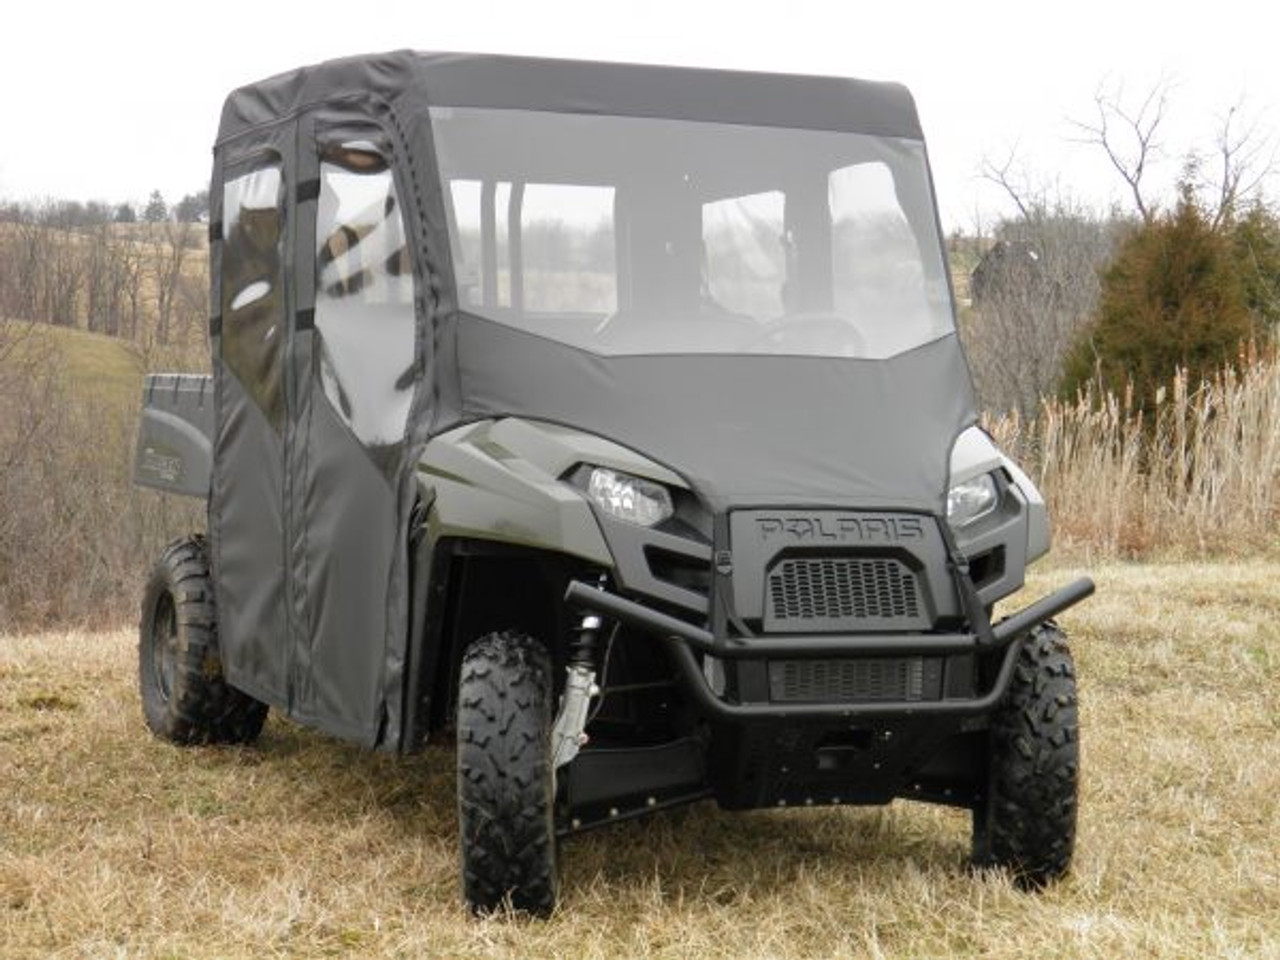 3 Star side x side Polaris Ranger Mid-Size Crew 500/570 full cab enclosure with vinyl windshield front angle view